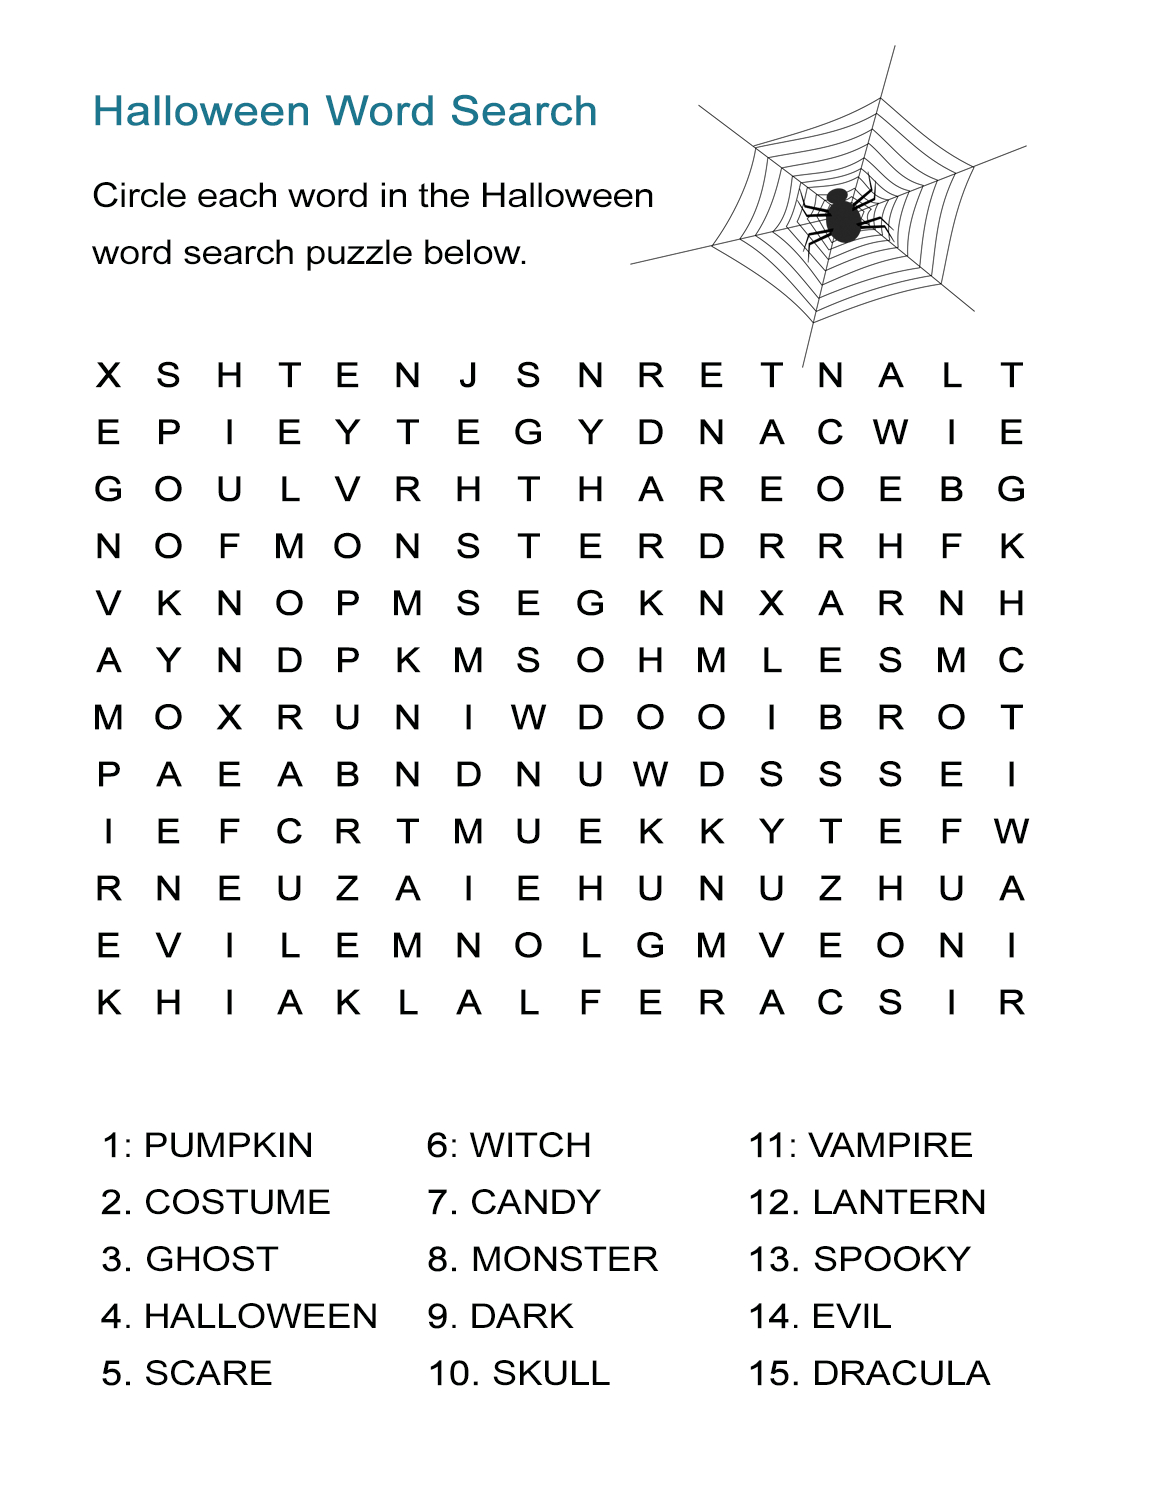 Halloween Word Search Puzzle: Find The Halloween Vocabulary In This - Free Printable Halloween Word Search Puzzles